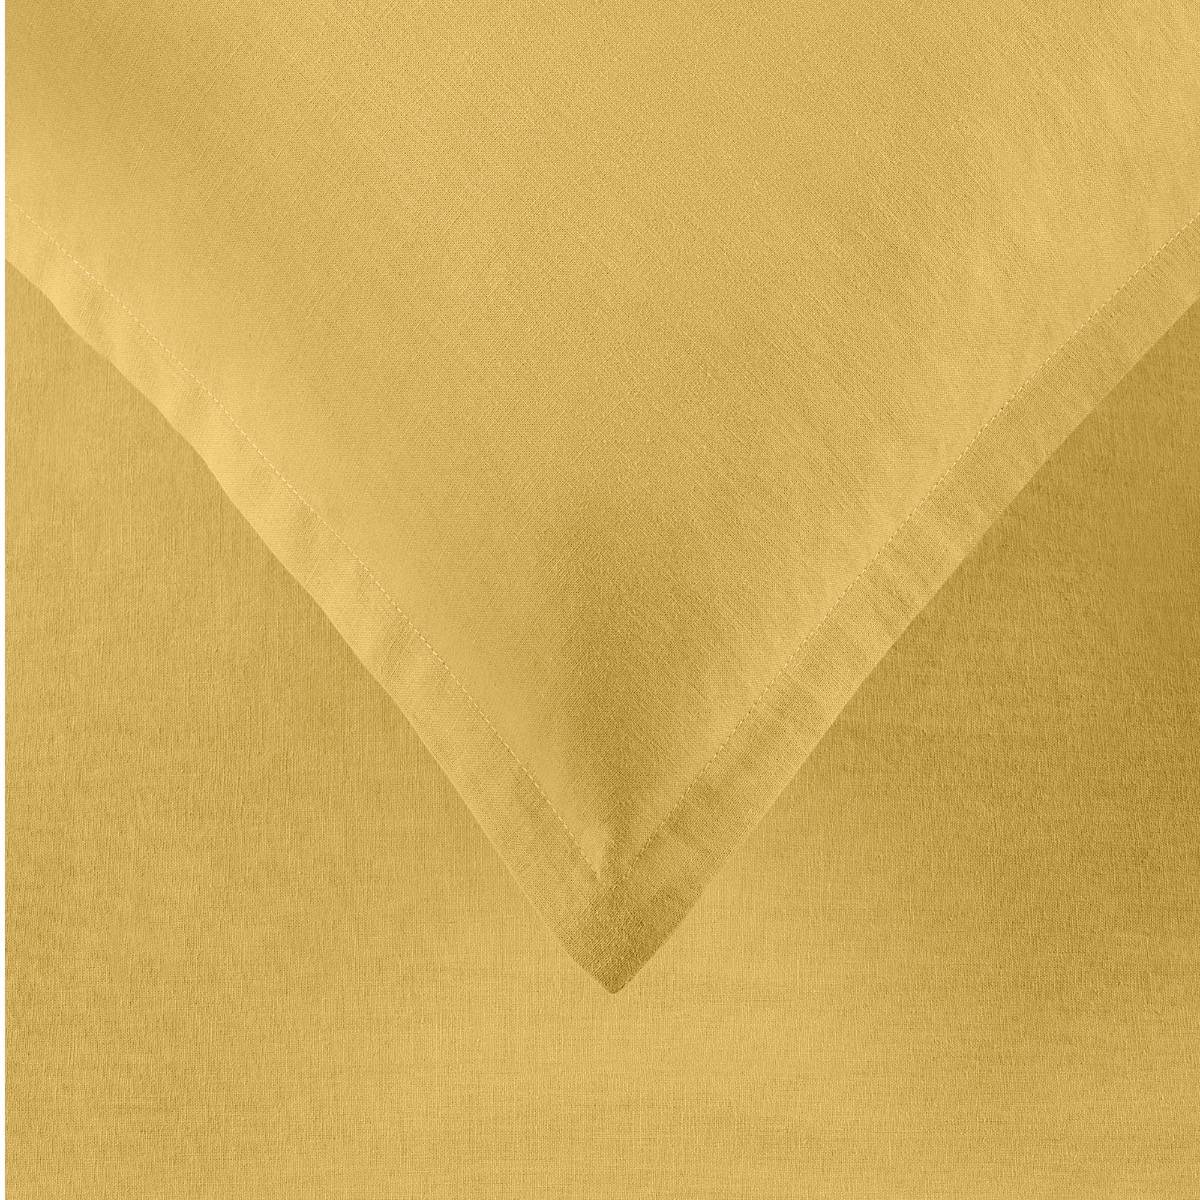 Wellington Gold Quilt Cover Set by Bianca